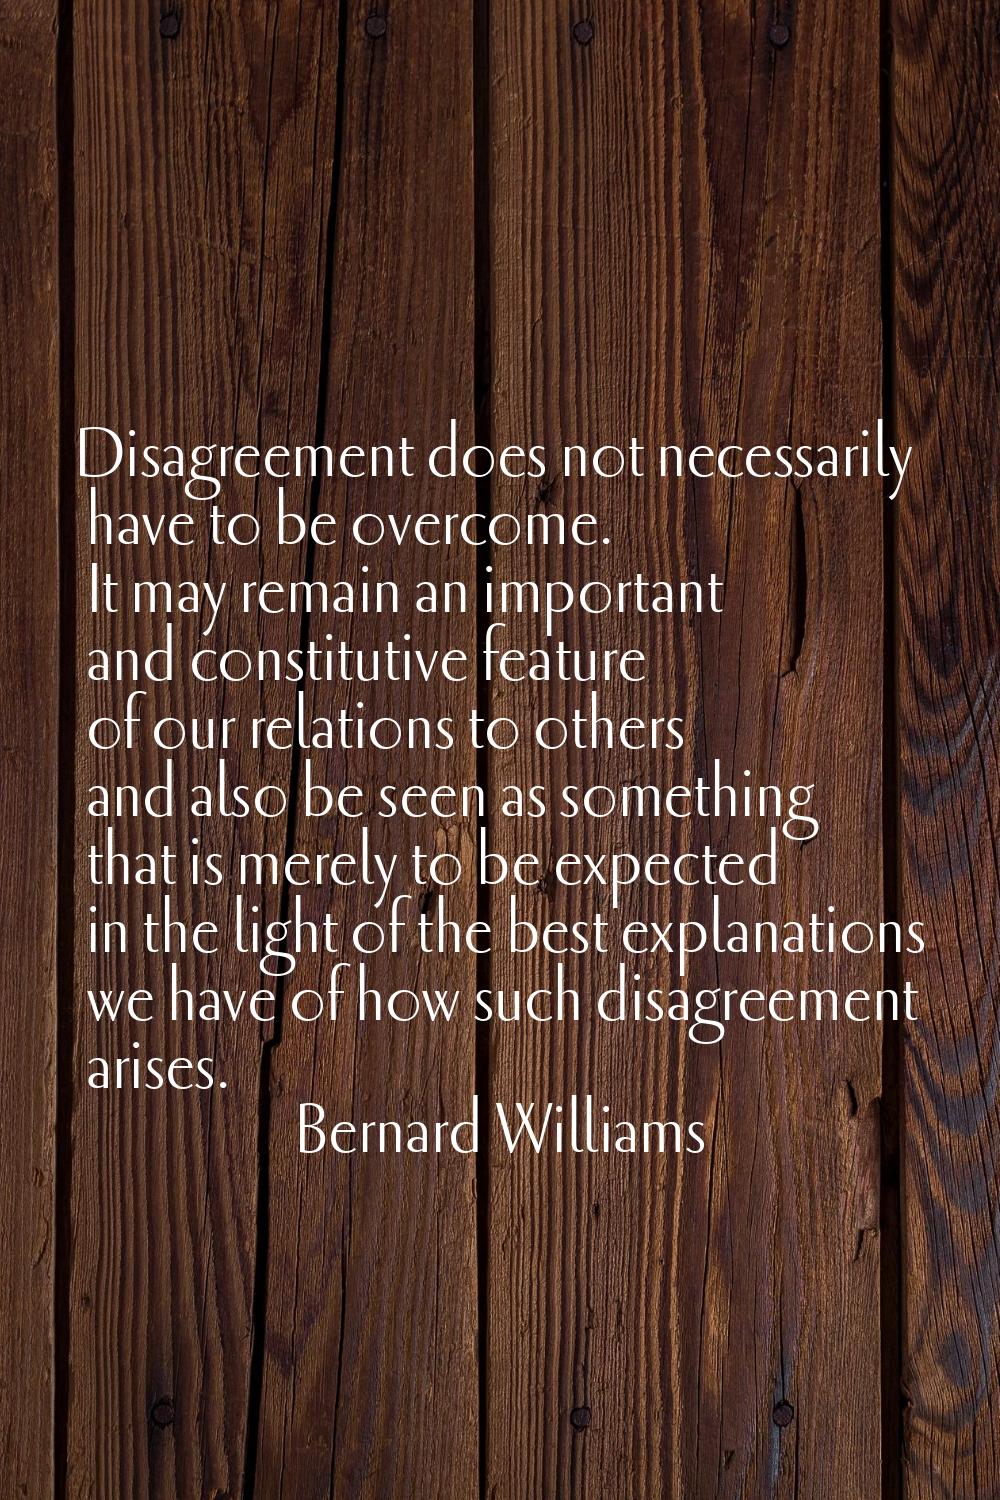 Disagreement does not necessarily have to be overcome. It may remain an important and constitutive 